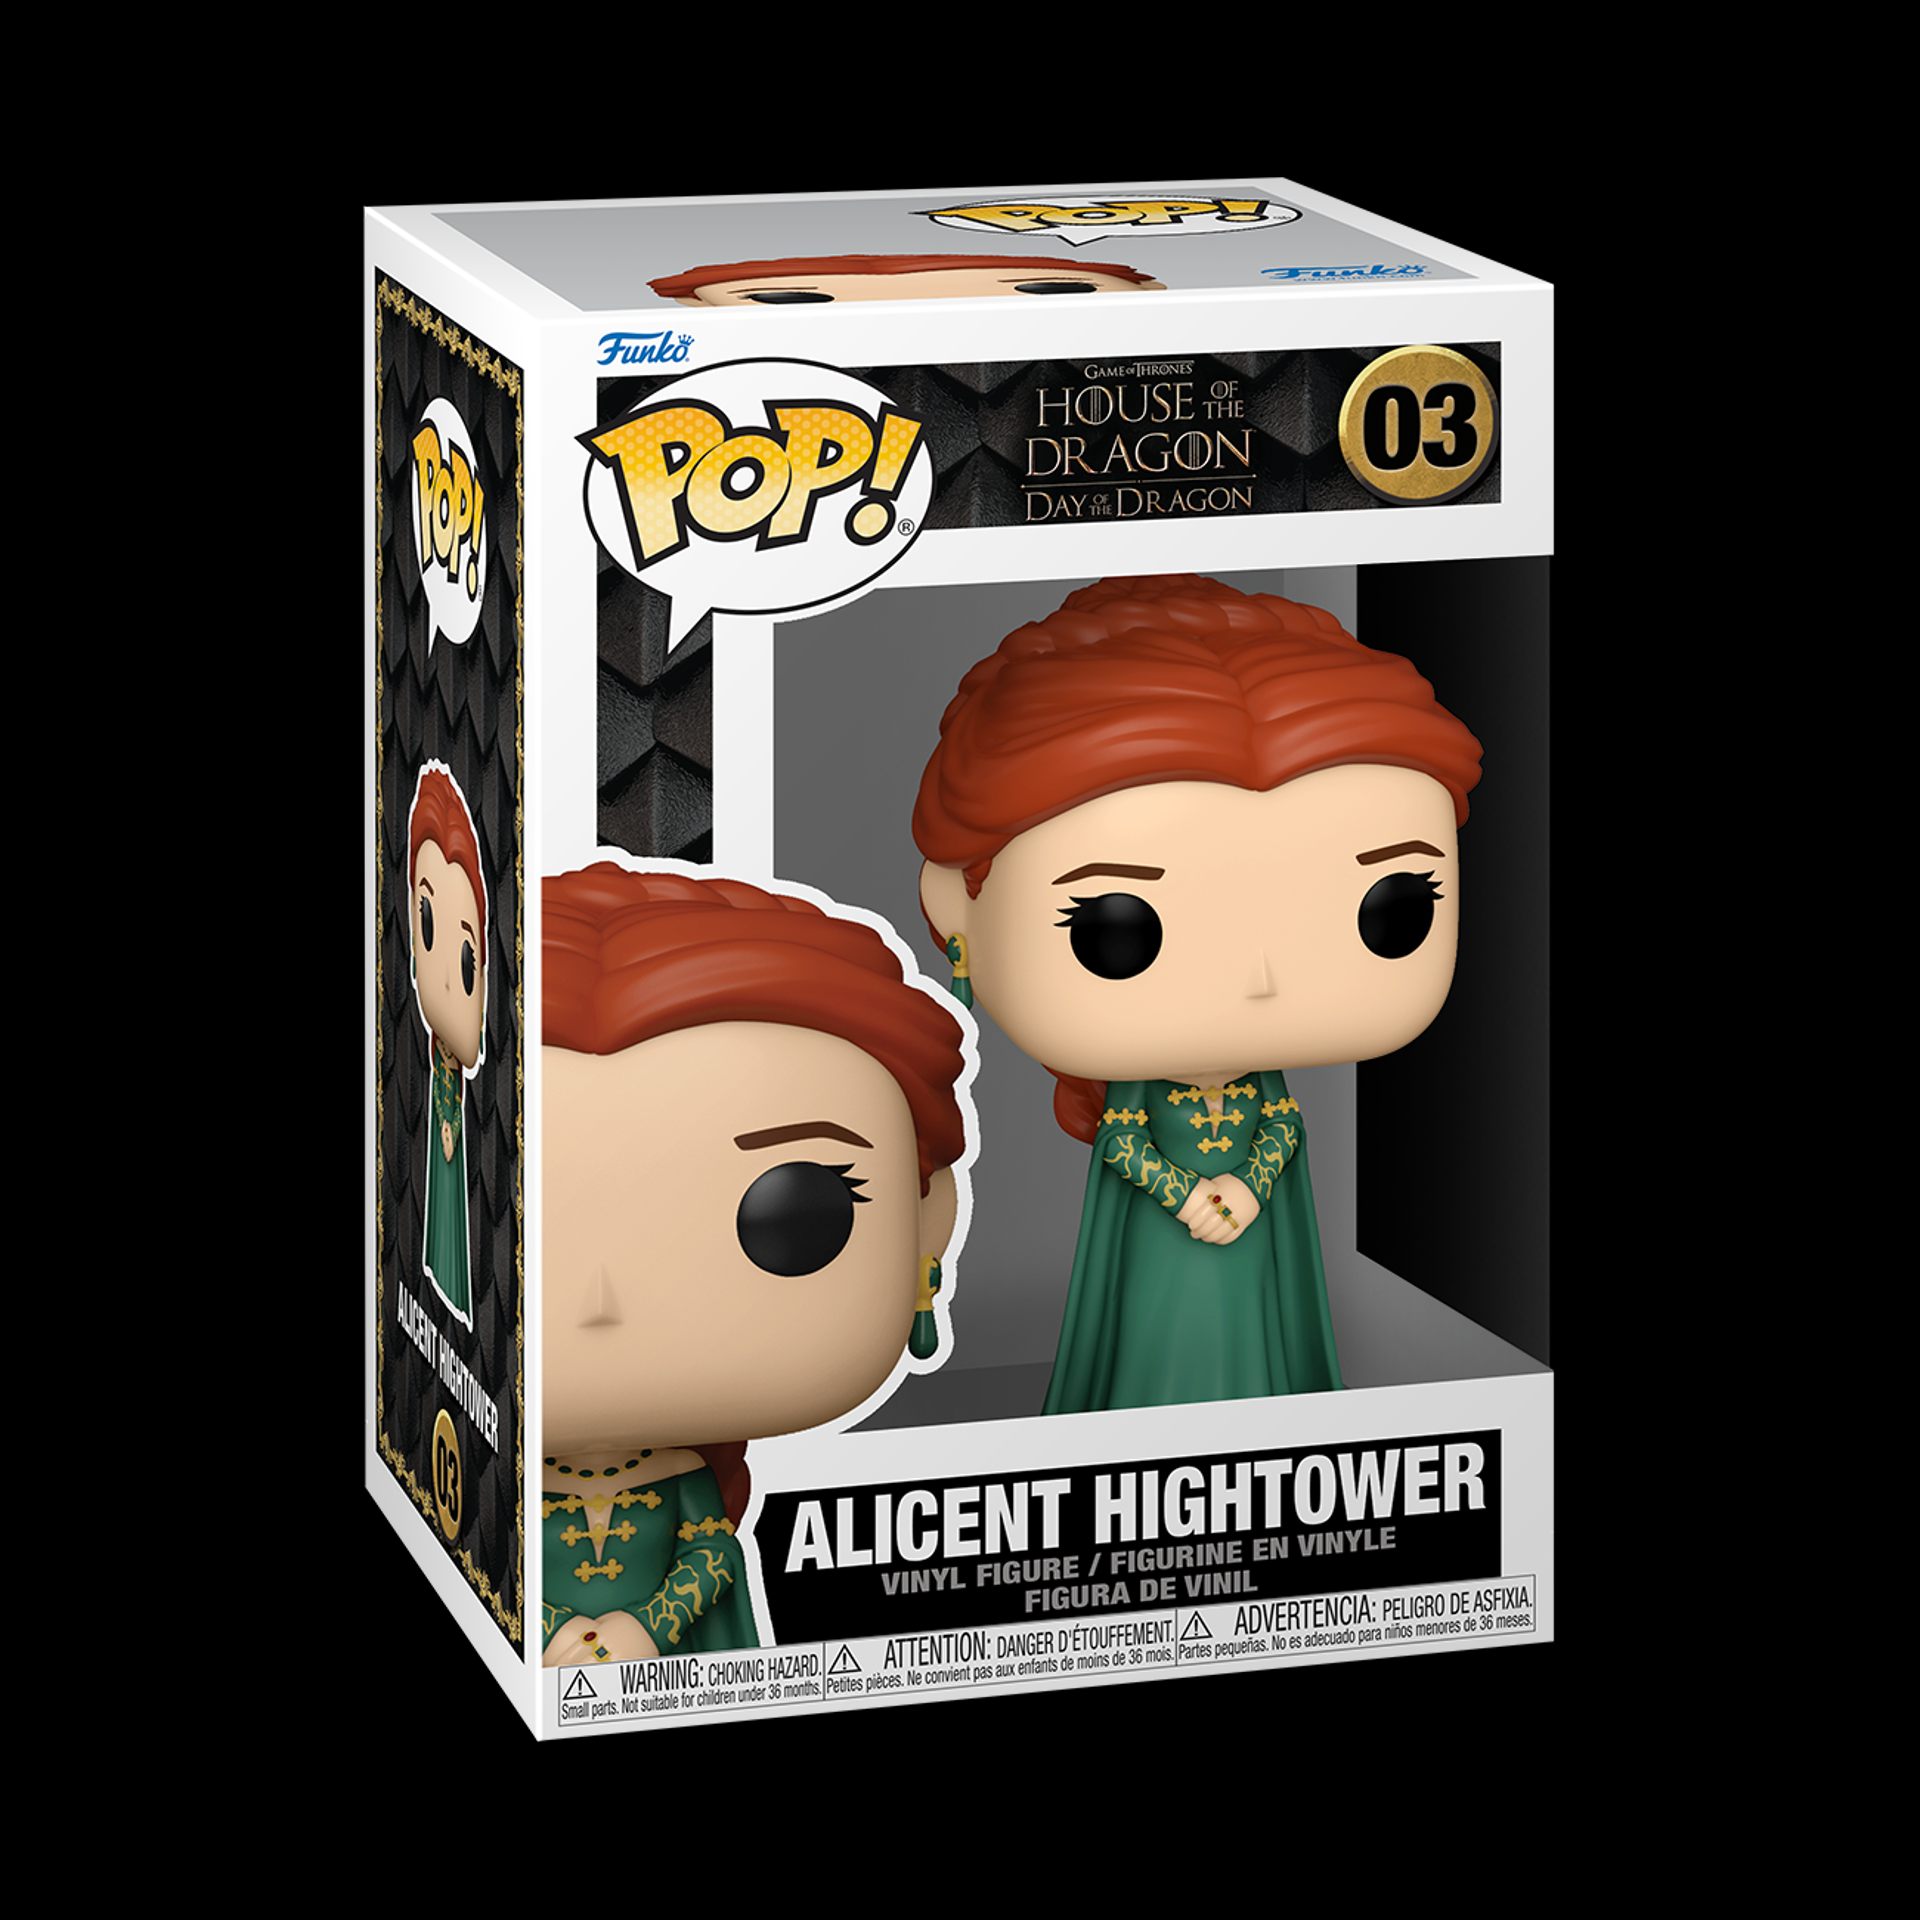 Funko Pop! Game of Thrones: House of the Dragon - Alicent Highto